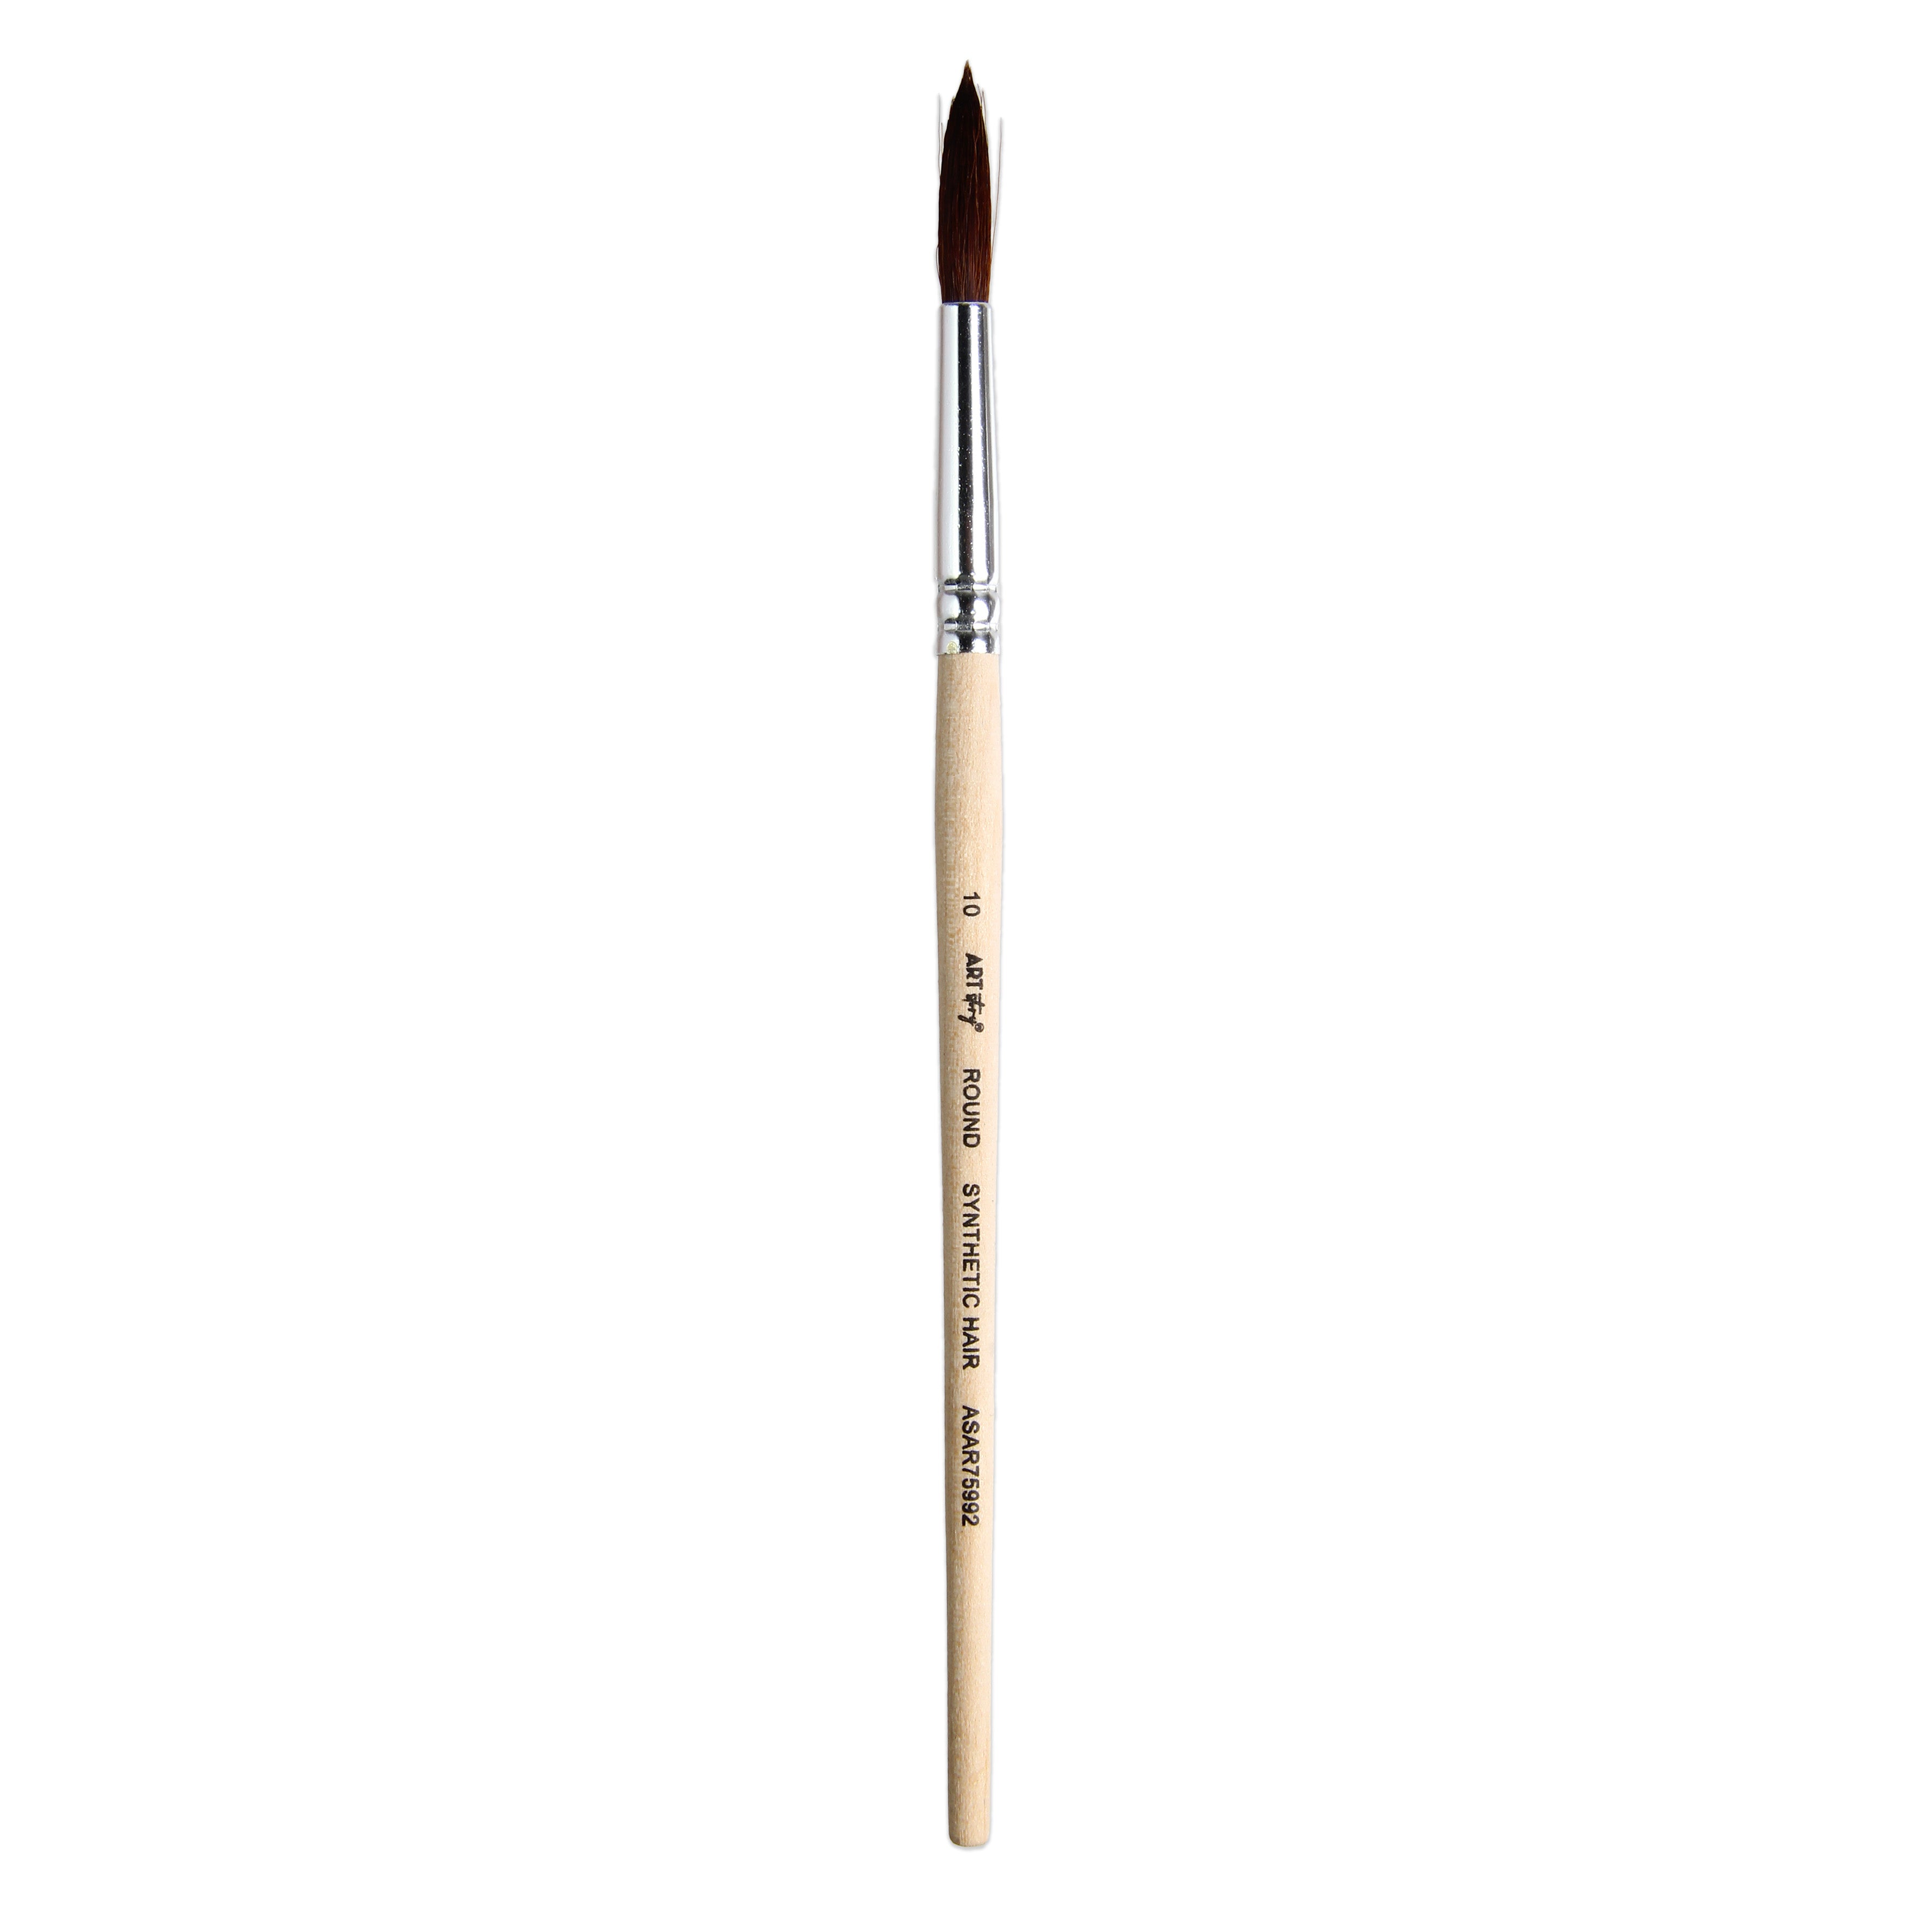 Watercolour Round Brush Synthetic (10) 165mm